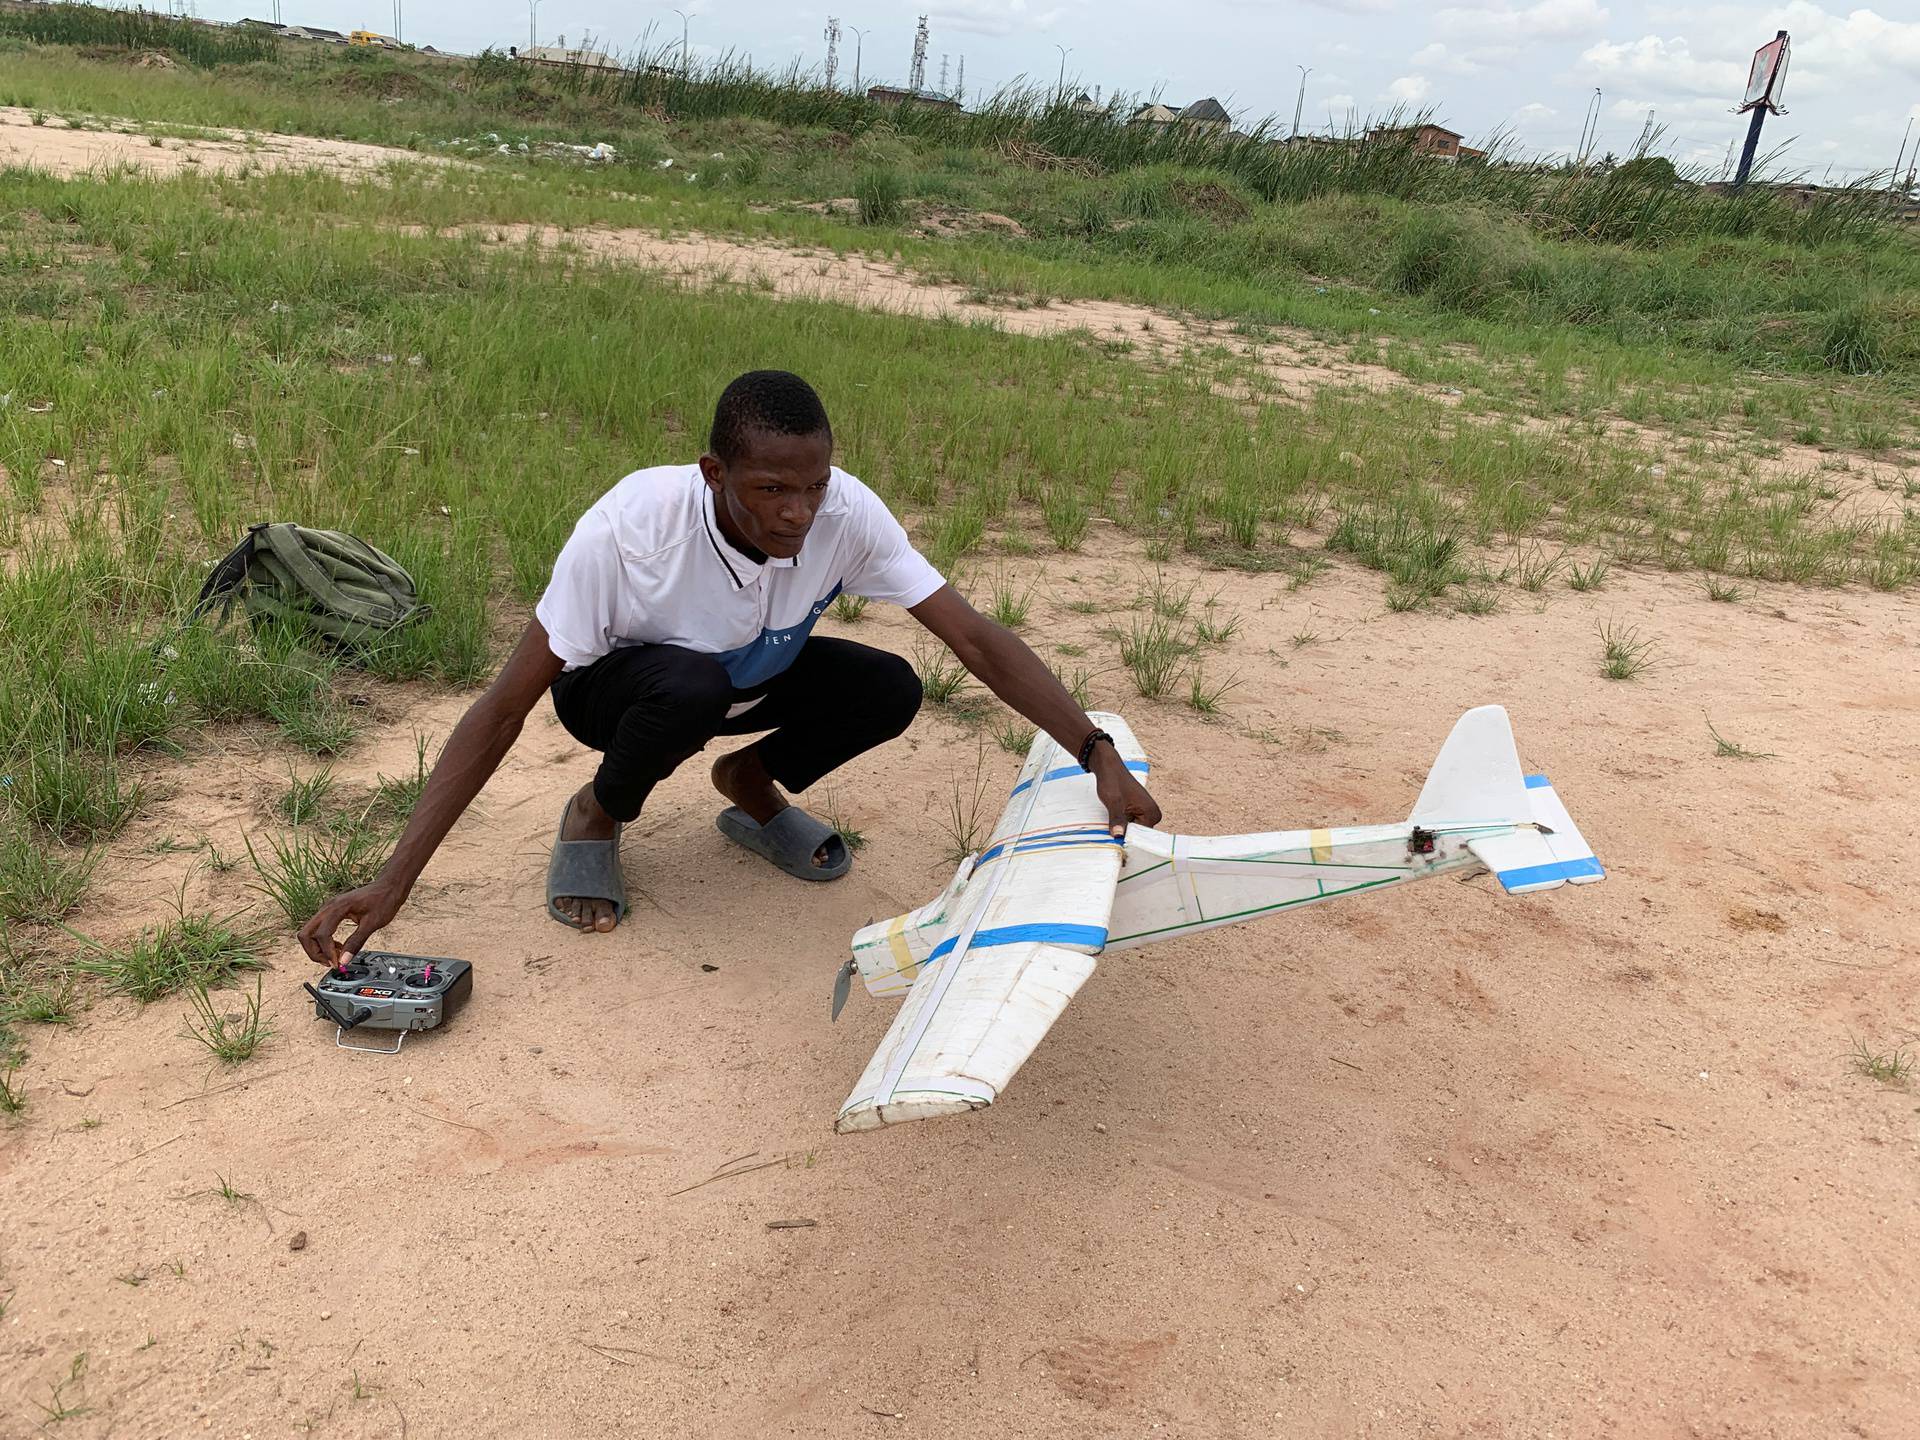 Bolaji Fatai prepares to fly a model aeroplane made from discarded waste in Lagos